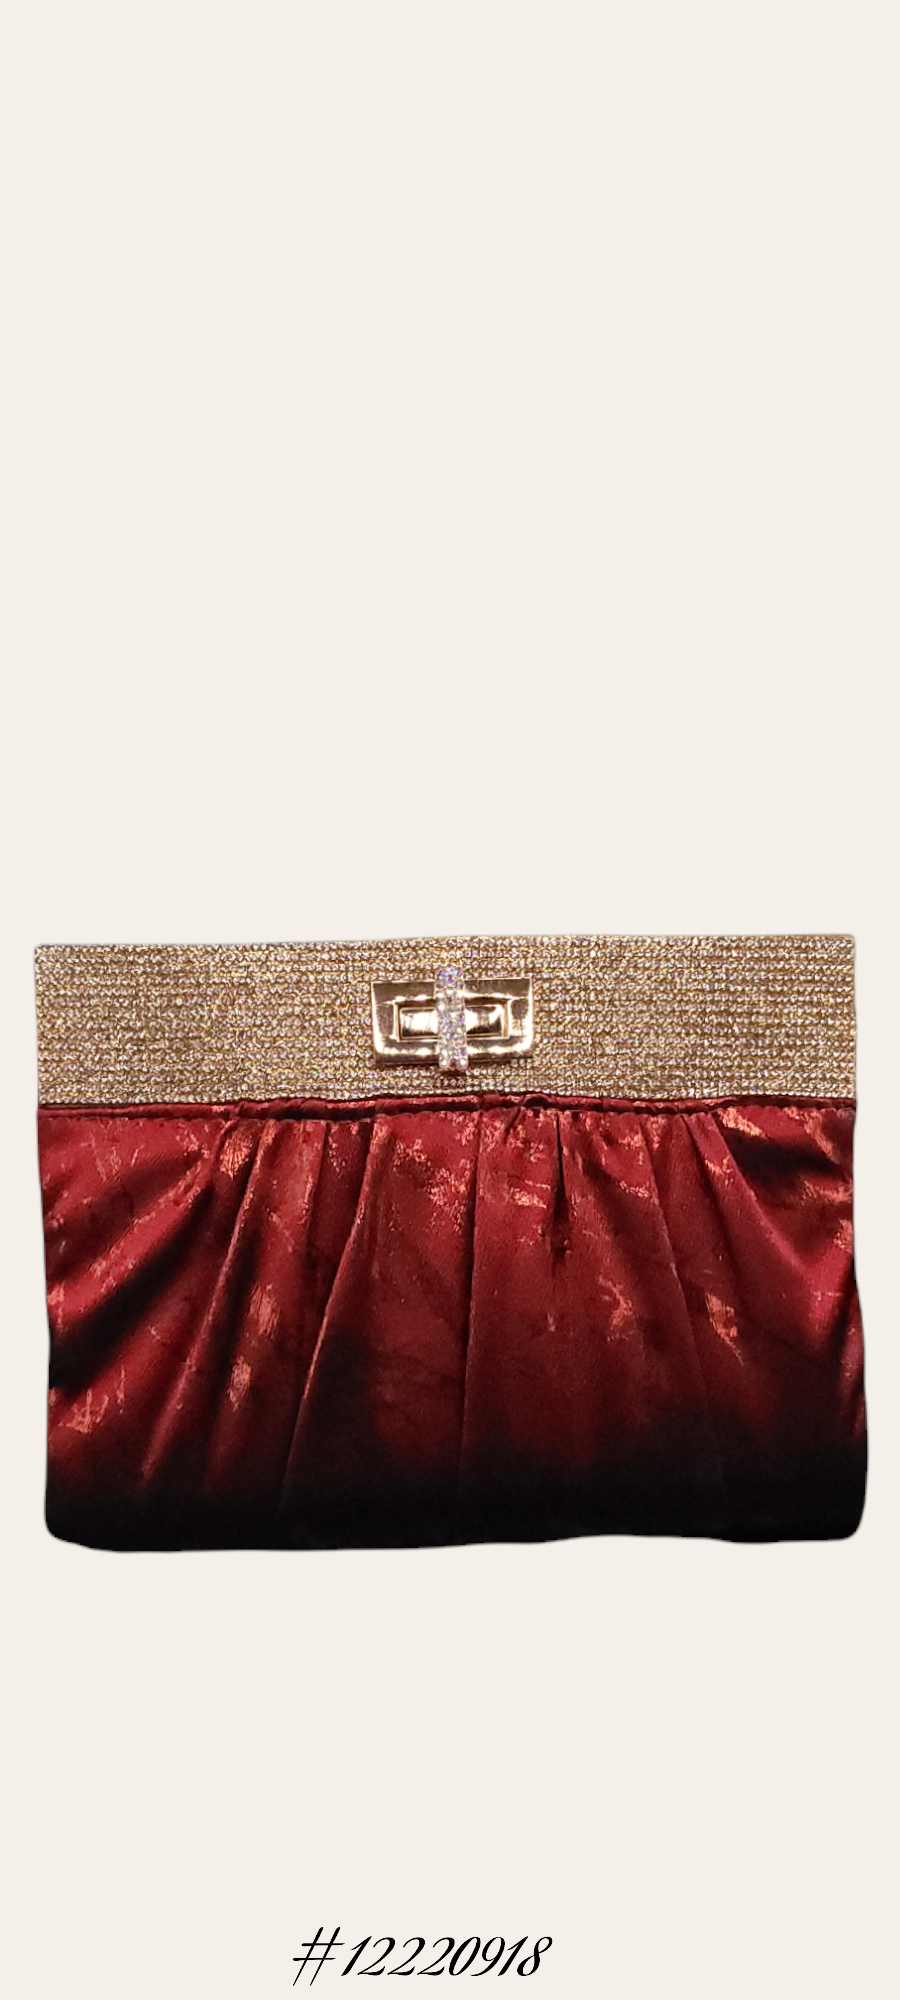 ELEGANT RED PARTY THEME CLUTCH WITH GOLD DIAMONDS